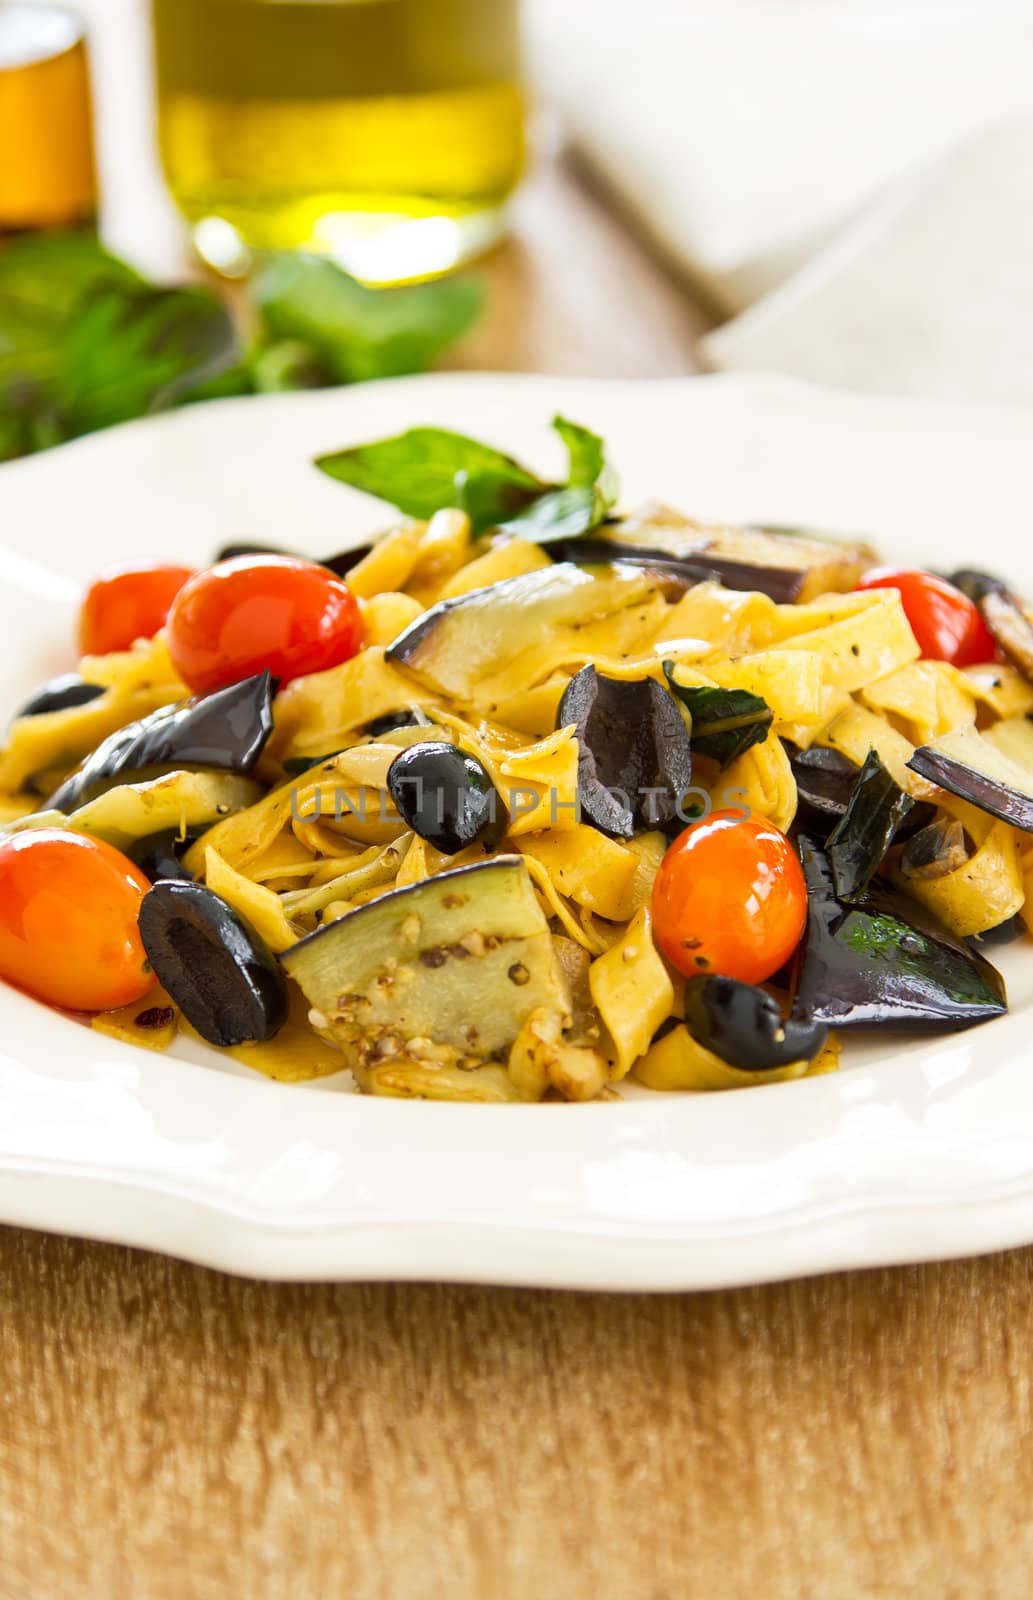 Fettuccine with aubergine, olive and dried chilli